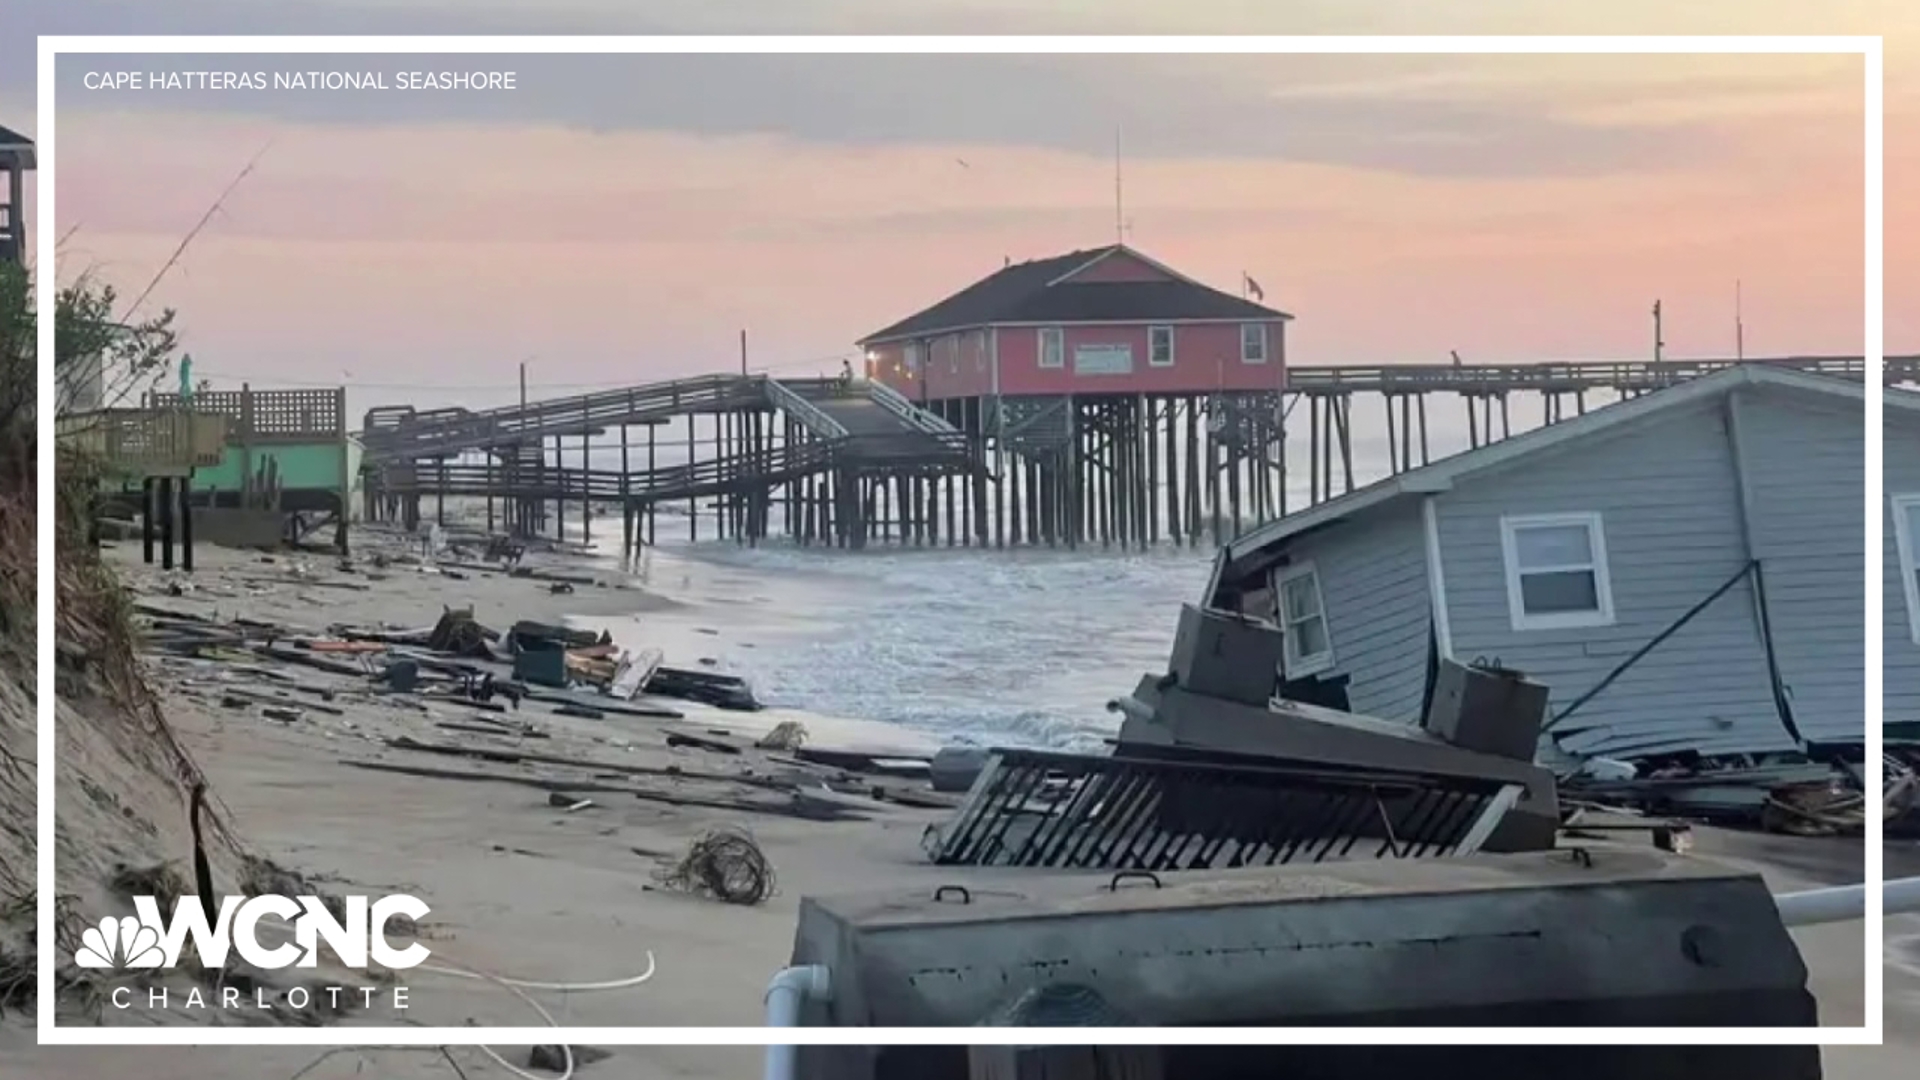 A house in Rodanthe, North Carolina fell into the ocean early Tuesday morning, marking the latest in a series of collapses in the Outer Banks community.